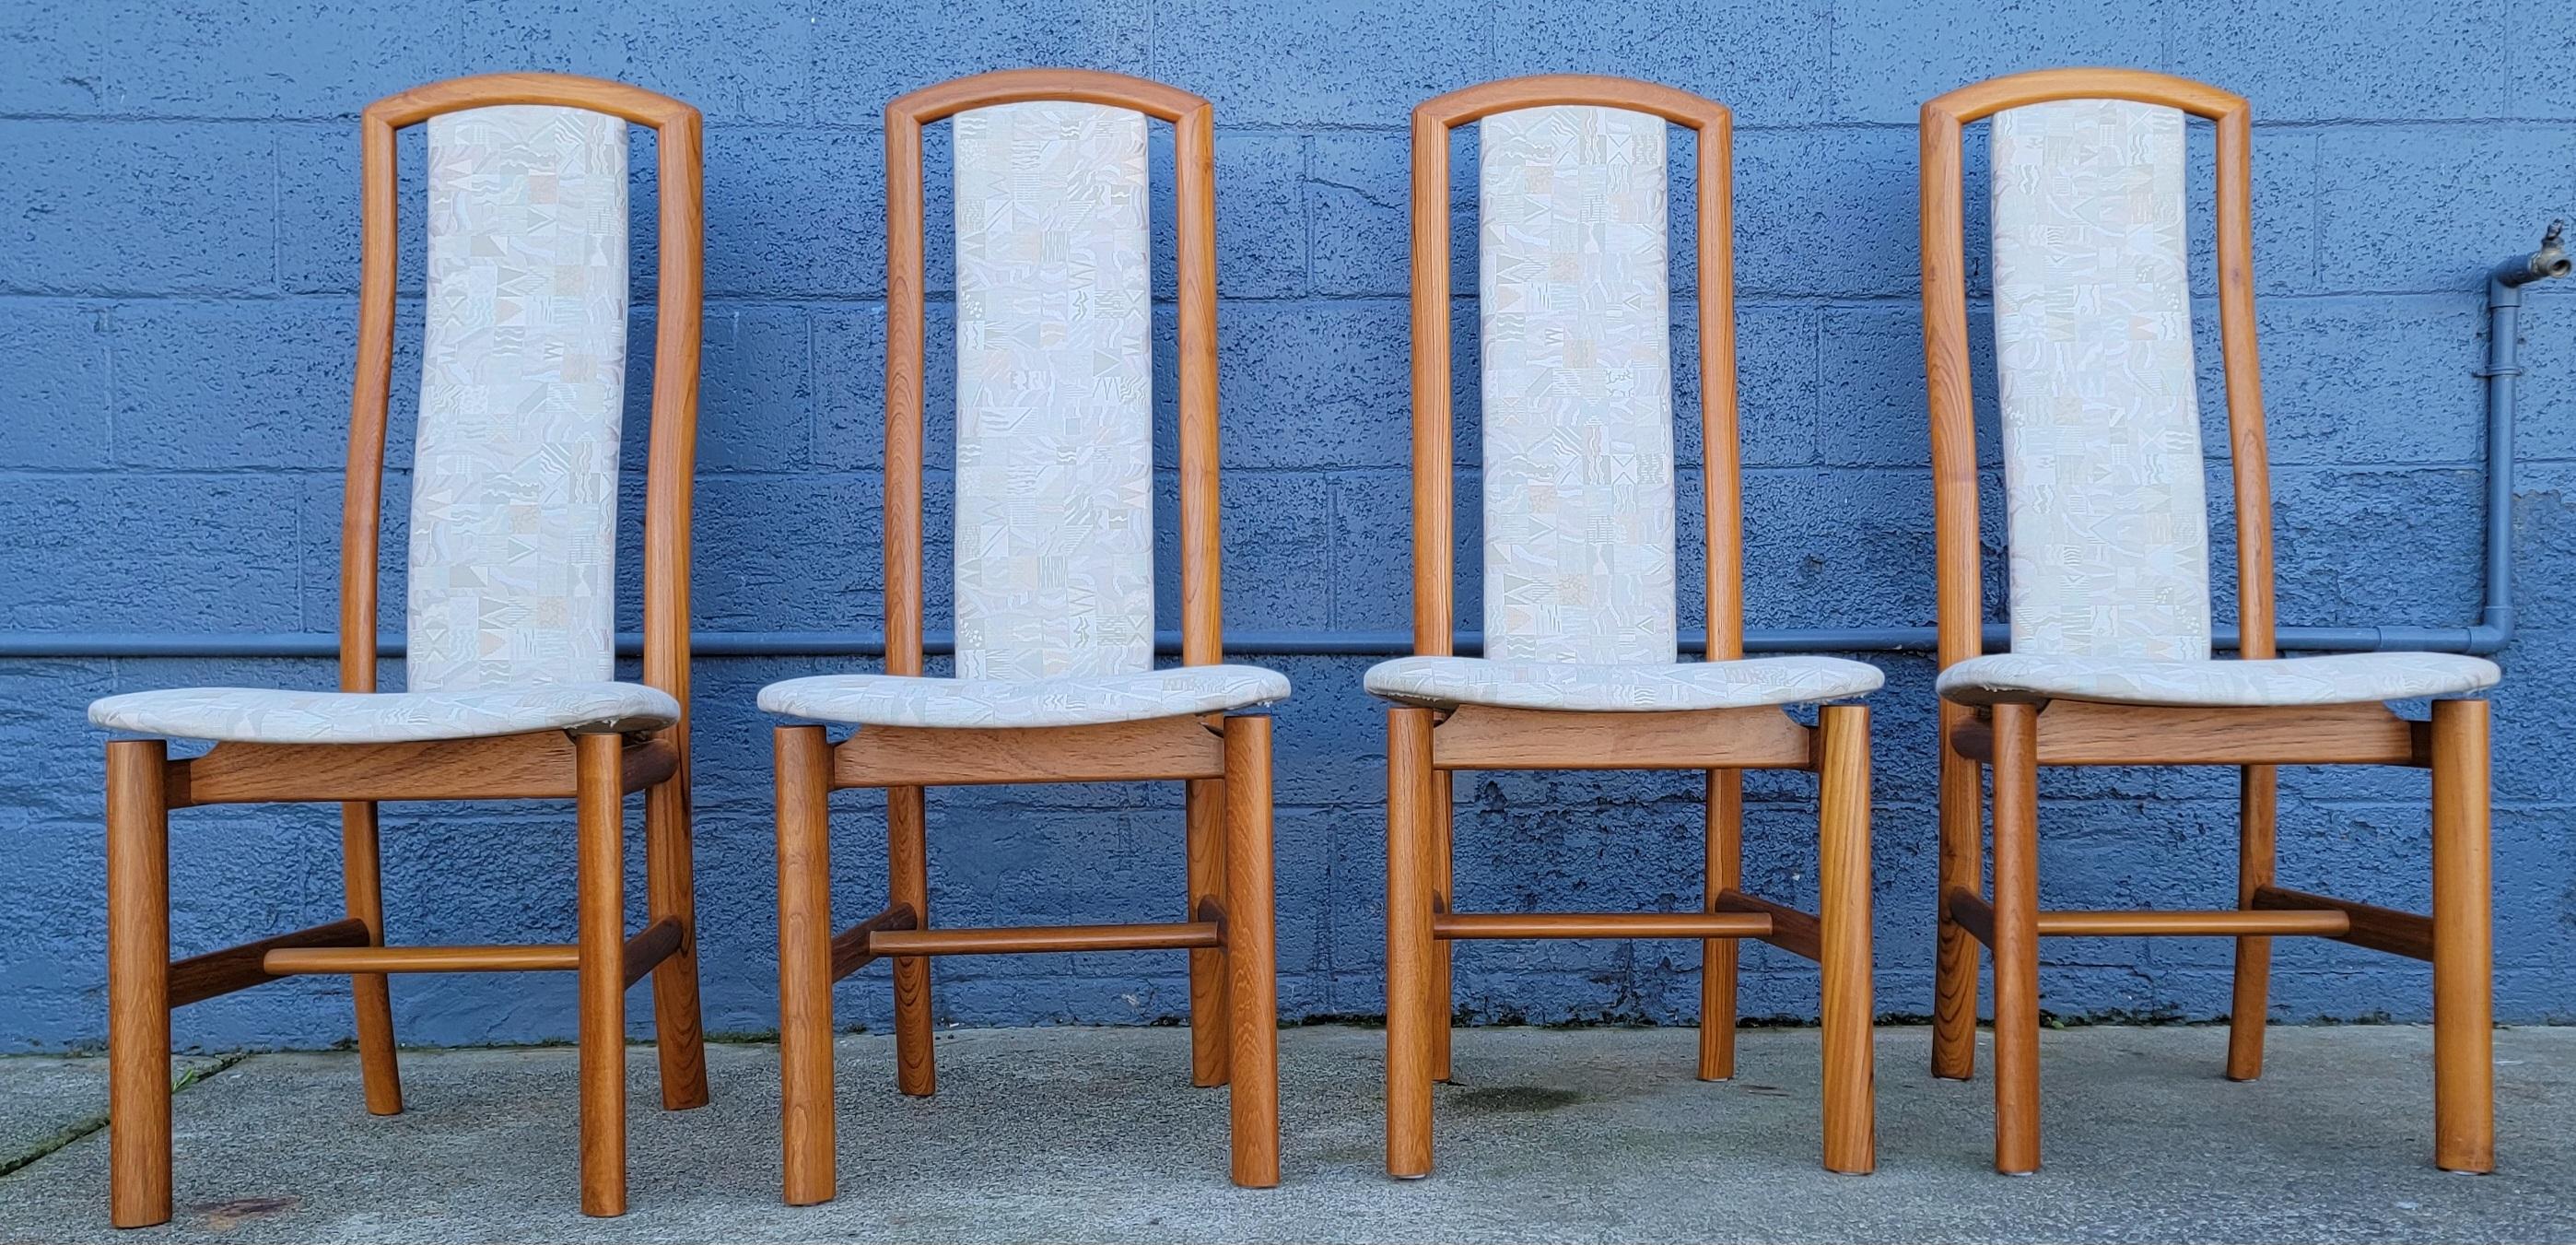 A quality set of 4 teak Danish Modern dining chairs by Skovby Mobelfabrik, Denmark. Classic floating seat design. Curvaceous high-back design offers extreme comfort. Substantial solid teak construction.